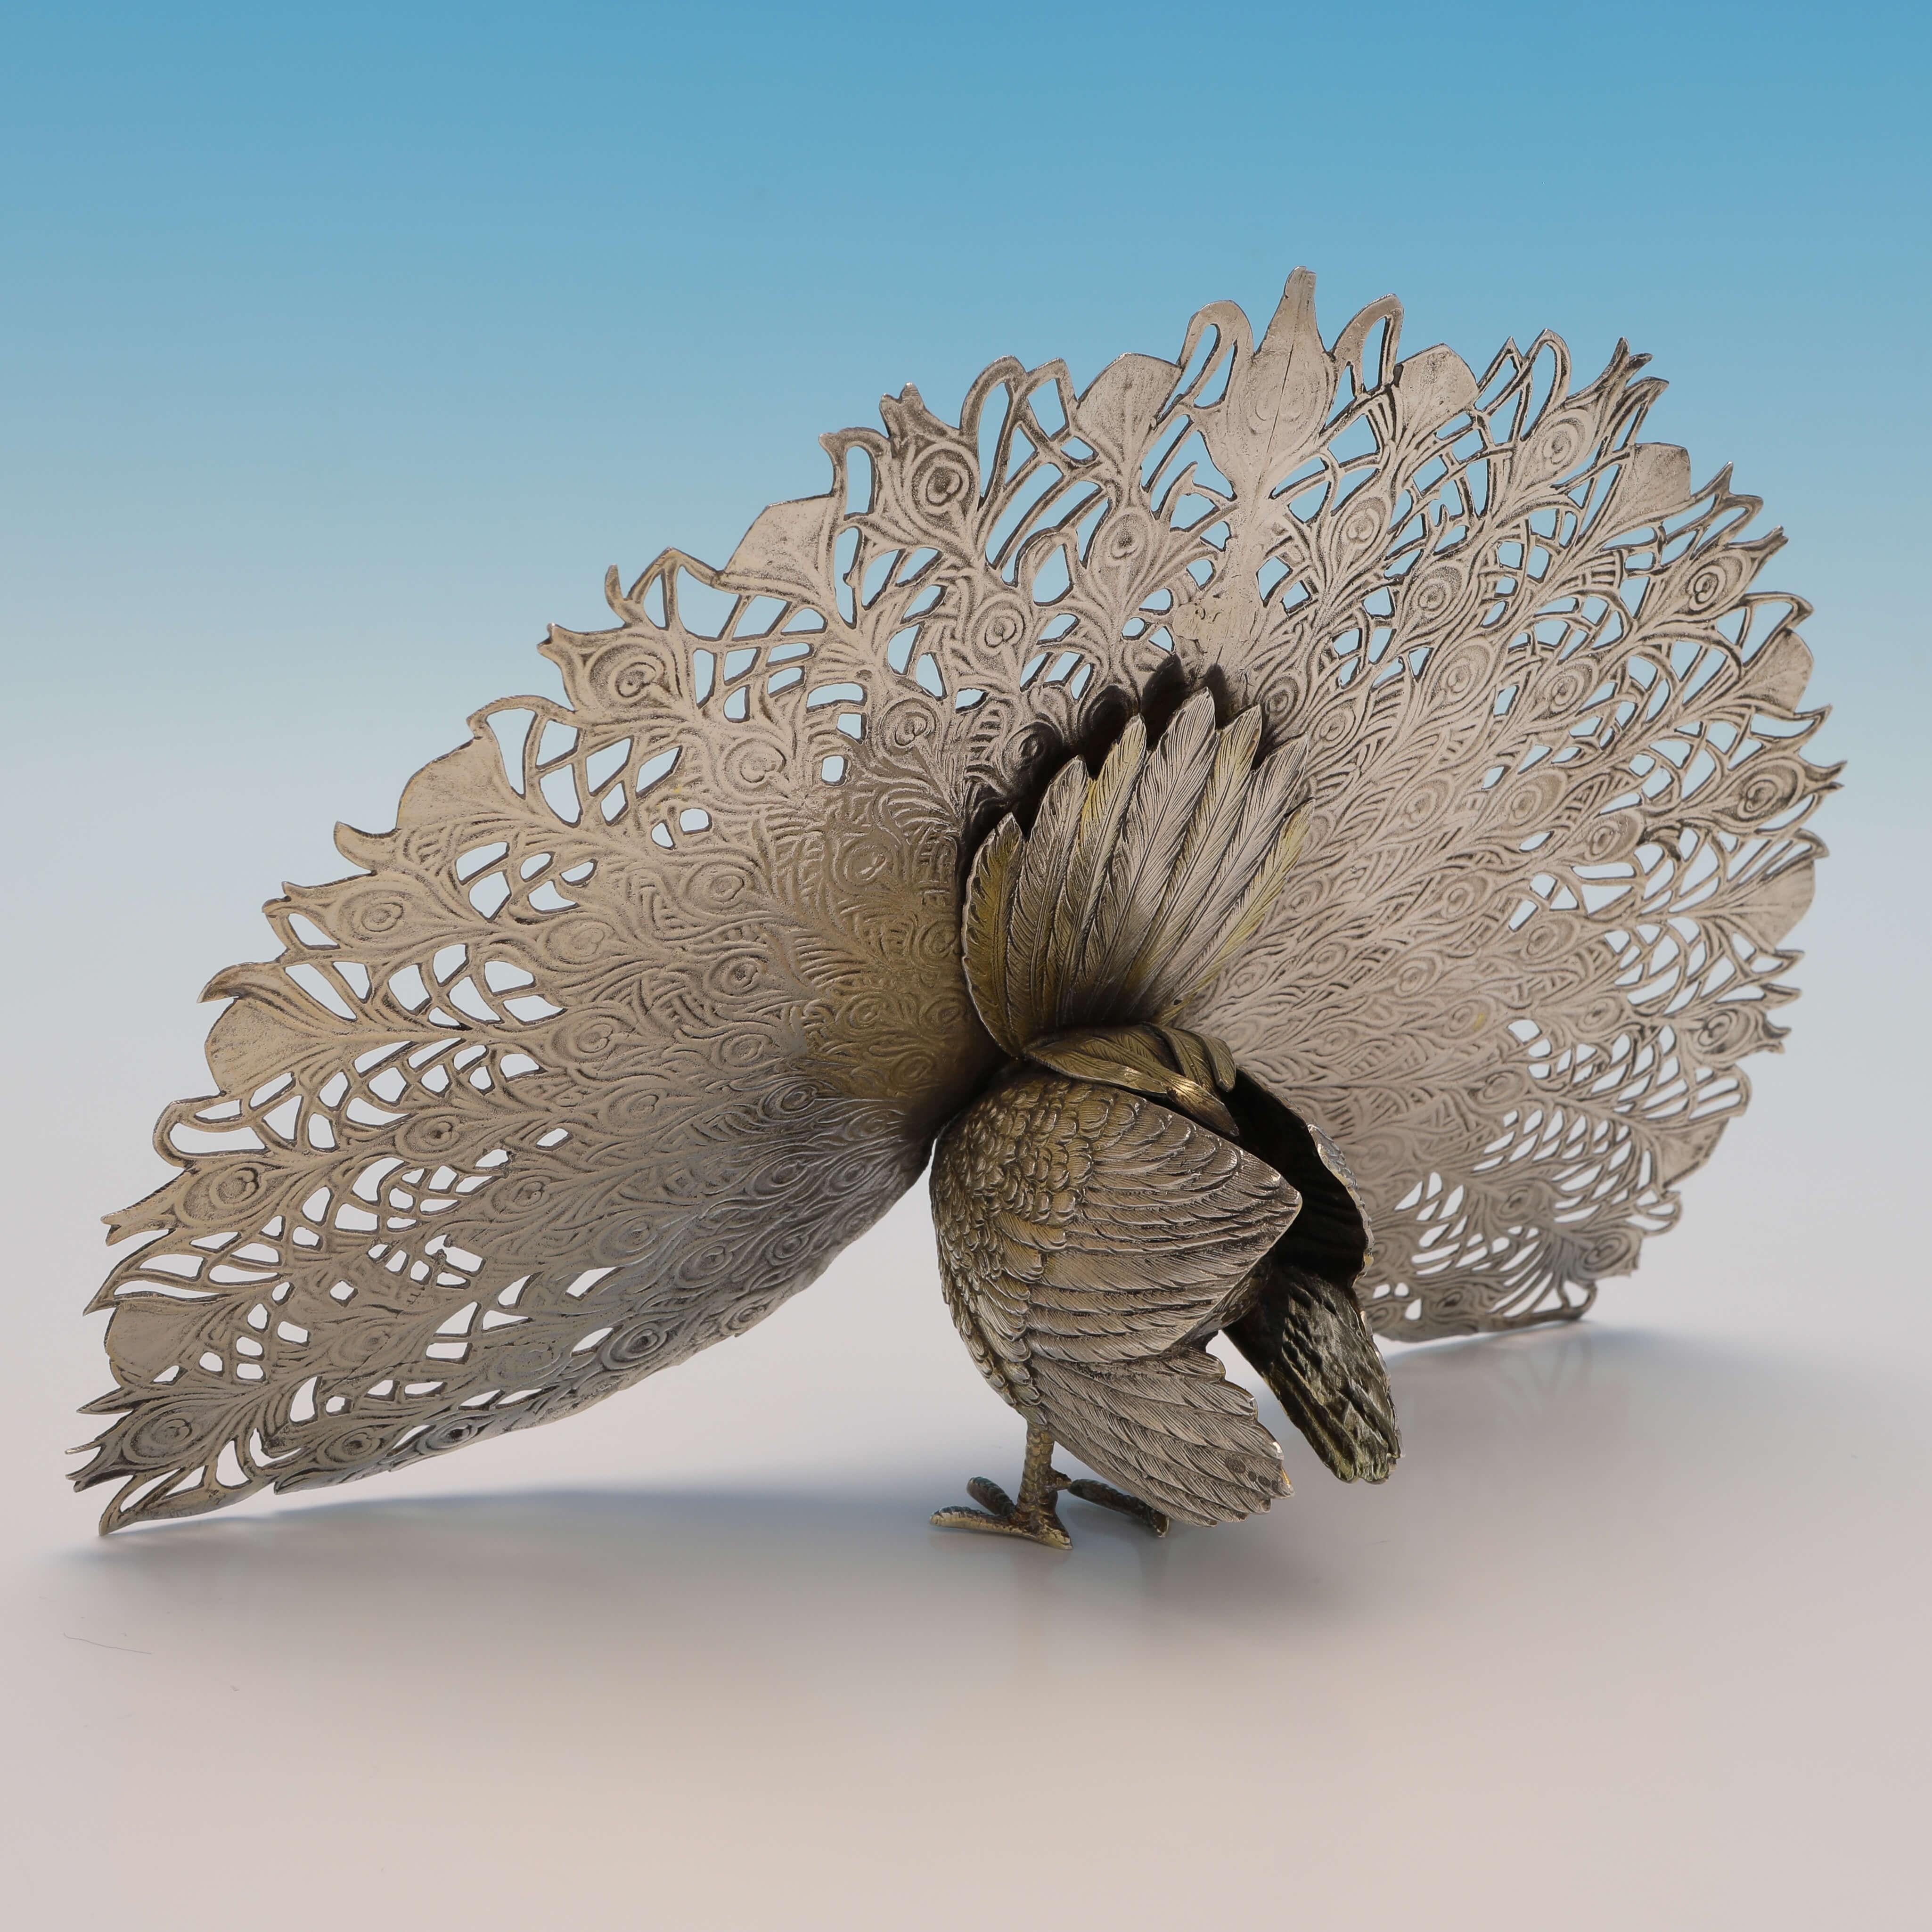 Carrying import marks for London in 1970 by I. Freeman & Sons, this charming, Sterling Silver Model of a Peacock, features gilt detailing to the body and tail feathers. 

The peacock measures 6.25